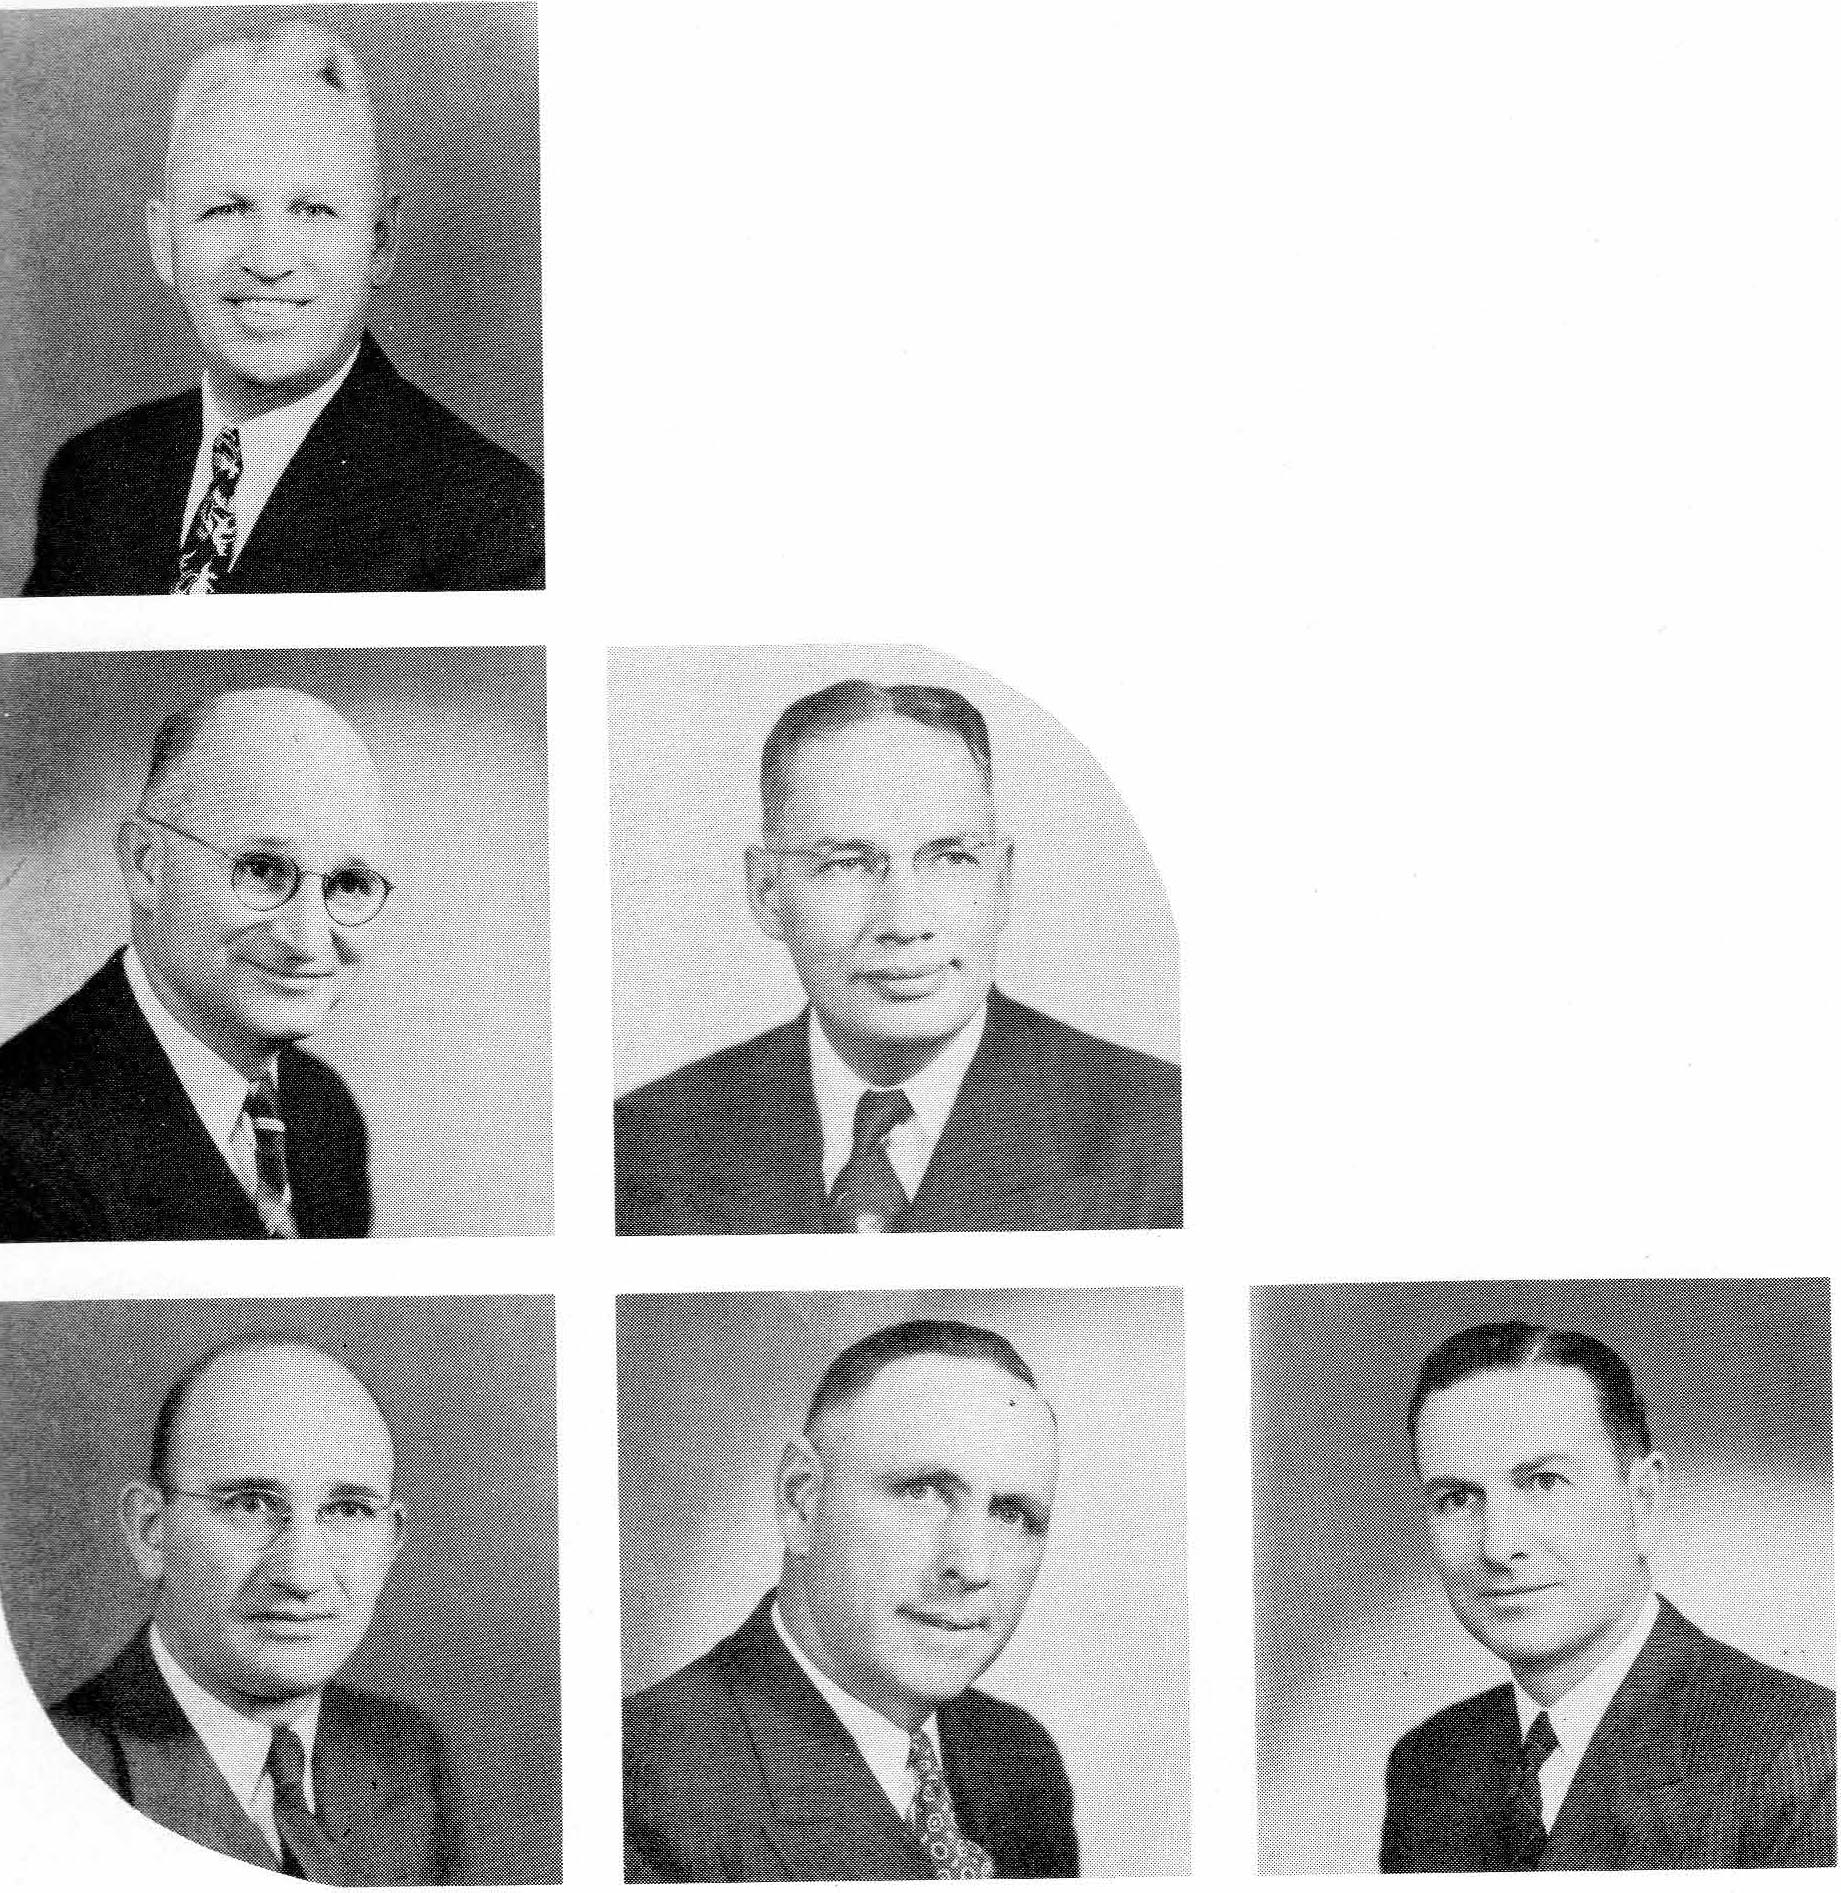 Dr R.D. Case and Board of Trustees